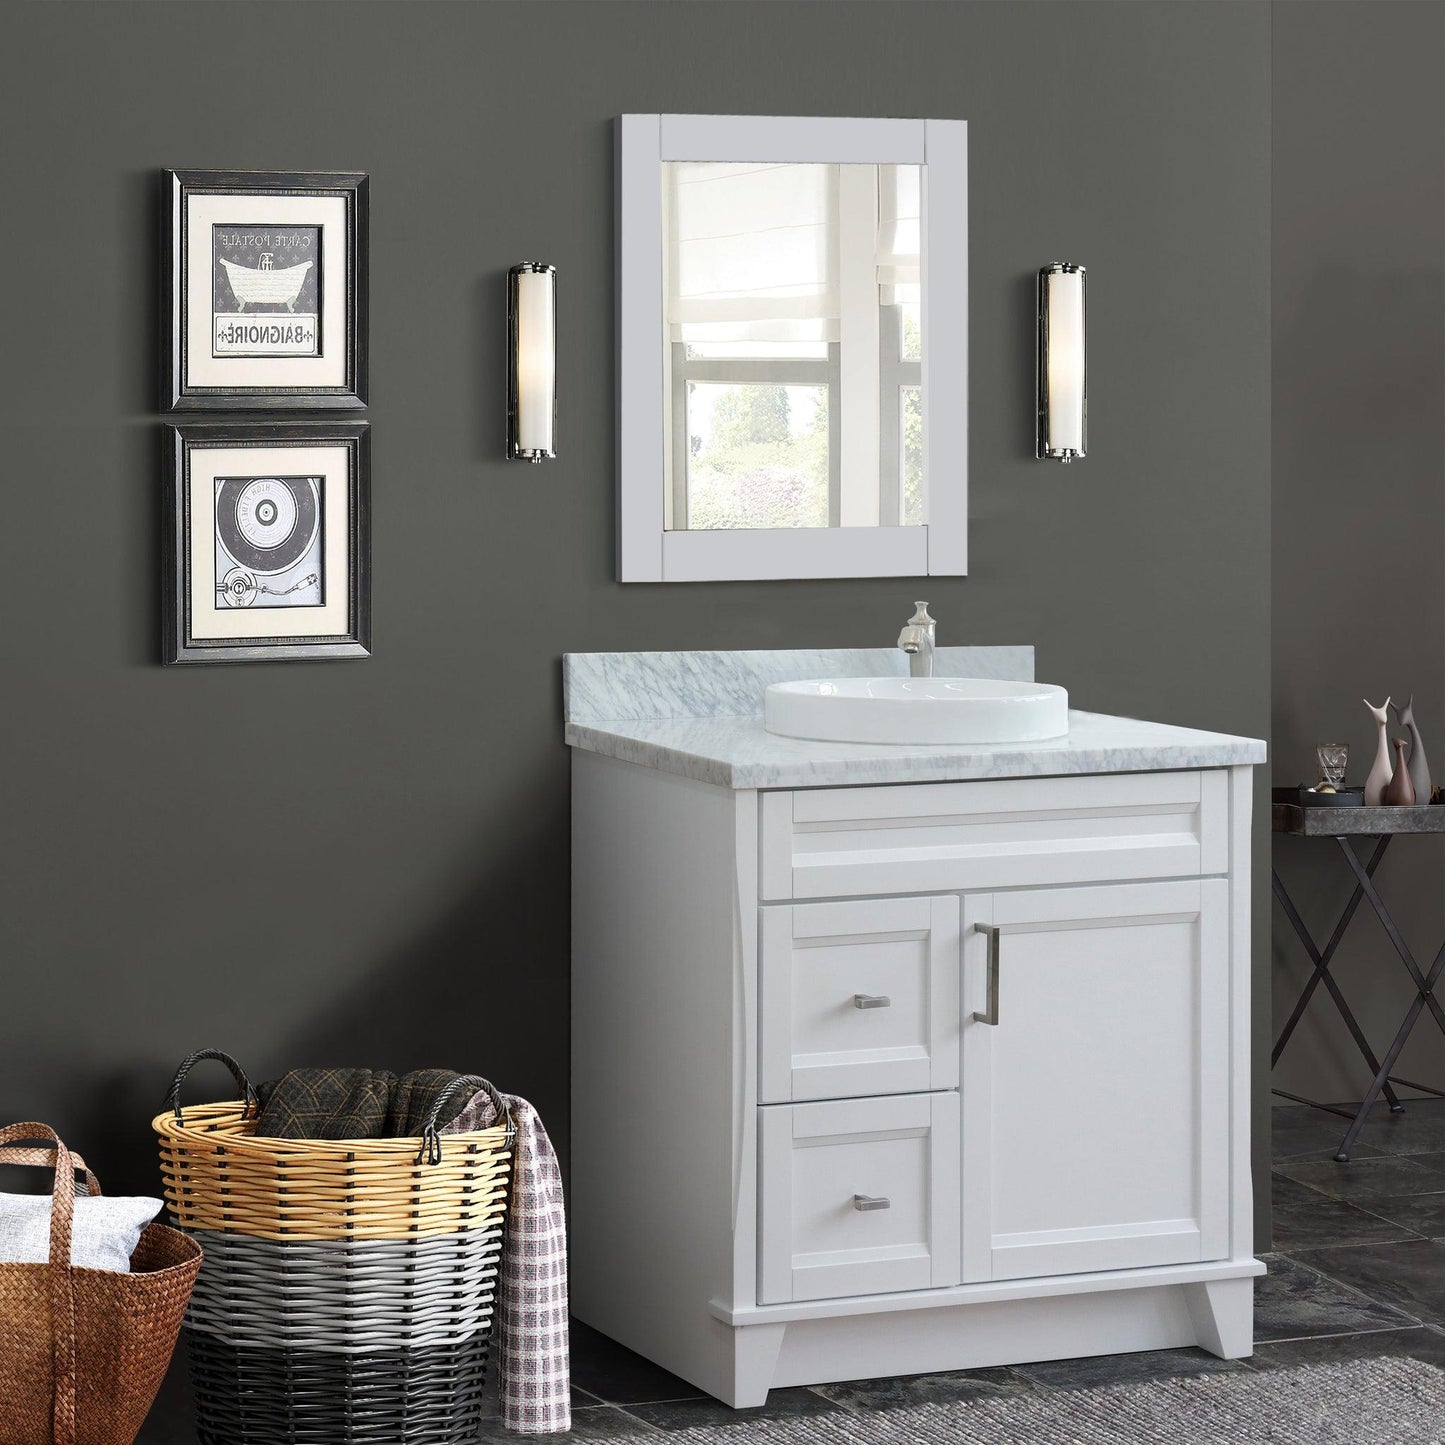 Bellaterra Home Terni 37" 1-Door 2-Drawer White Freestanding Vanity Set With Ceramic Center Vessel Sink and White Carrara Marble Top, and Right Door Base